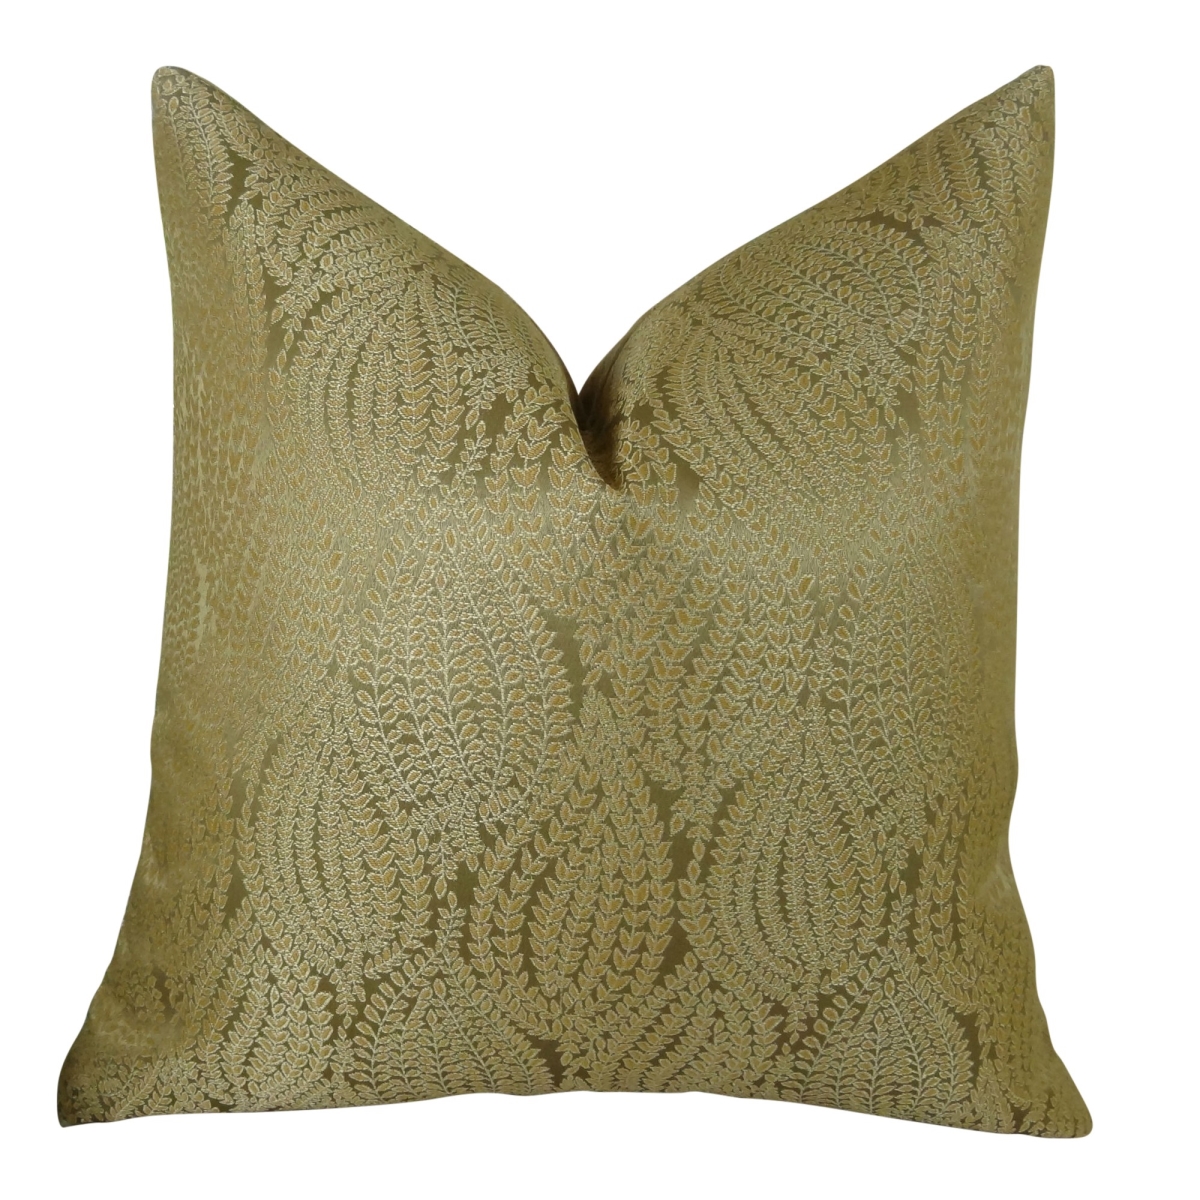 Pb11015-1818-dp Leaf Pod Handmade Double Sided Throw Pillow, Gold - 18 X 18 In.